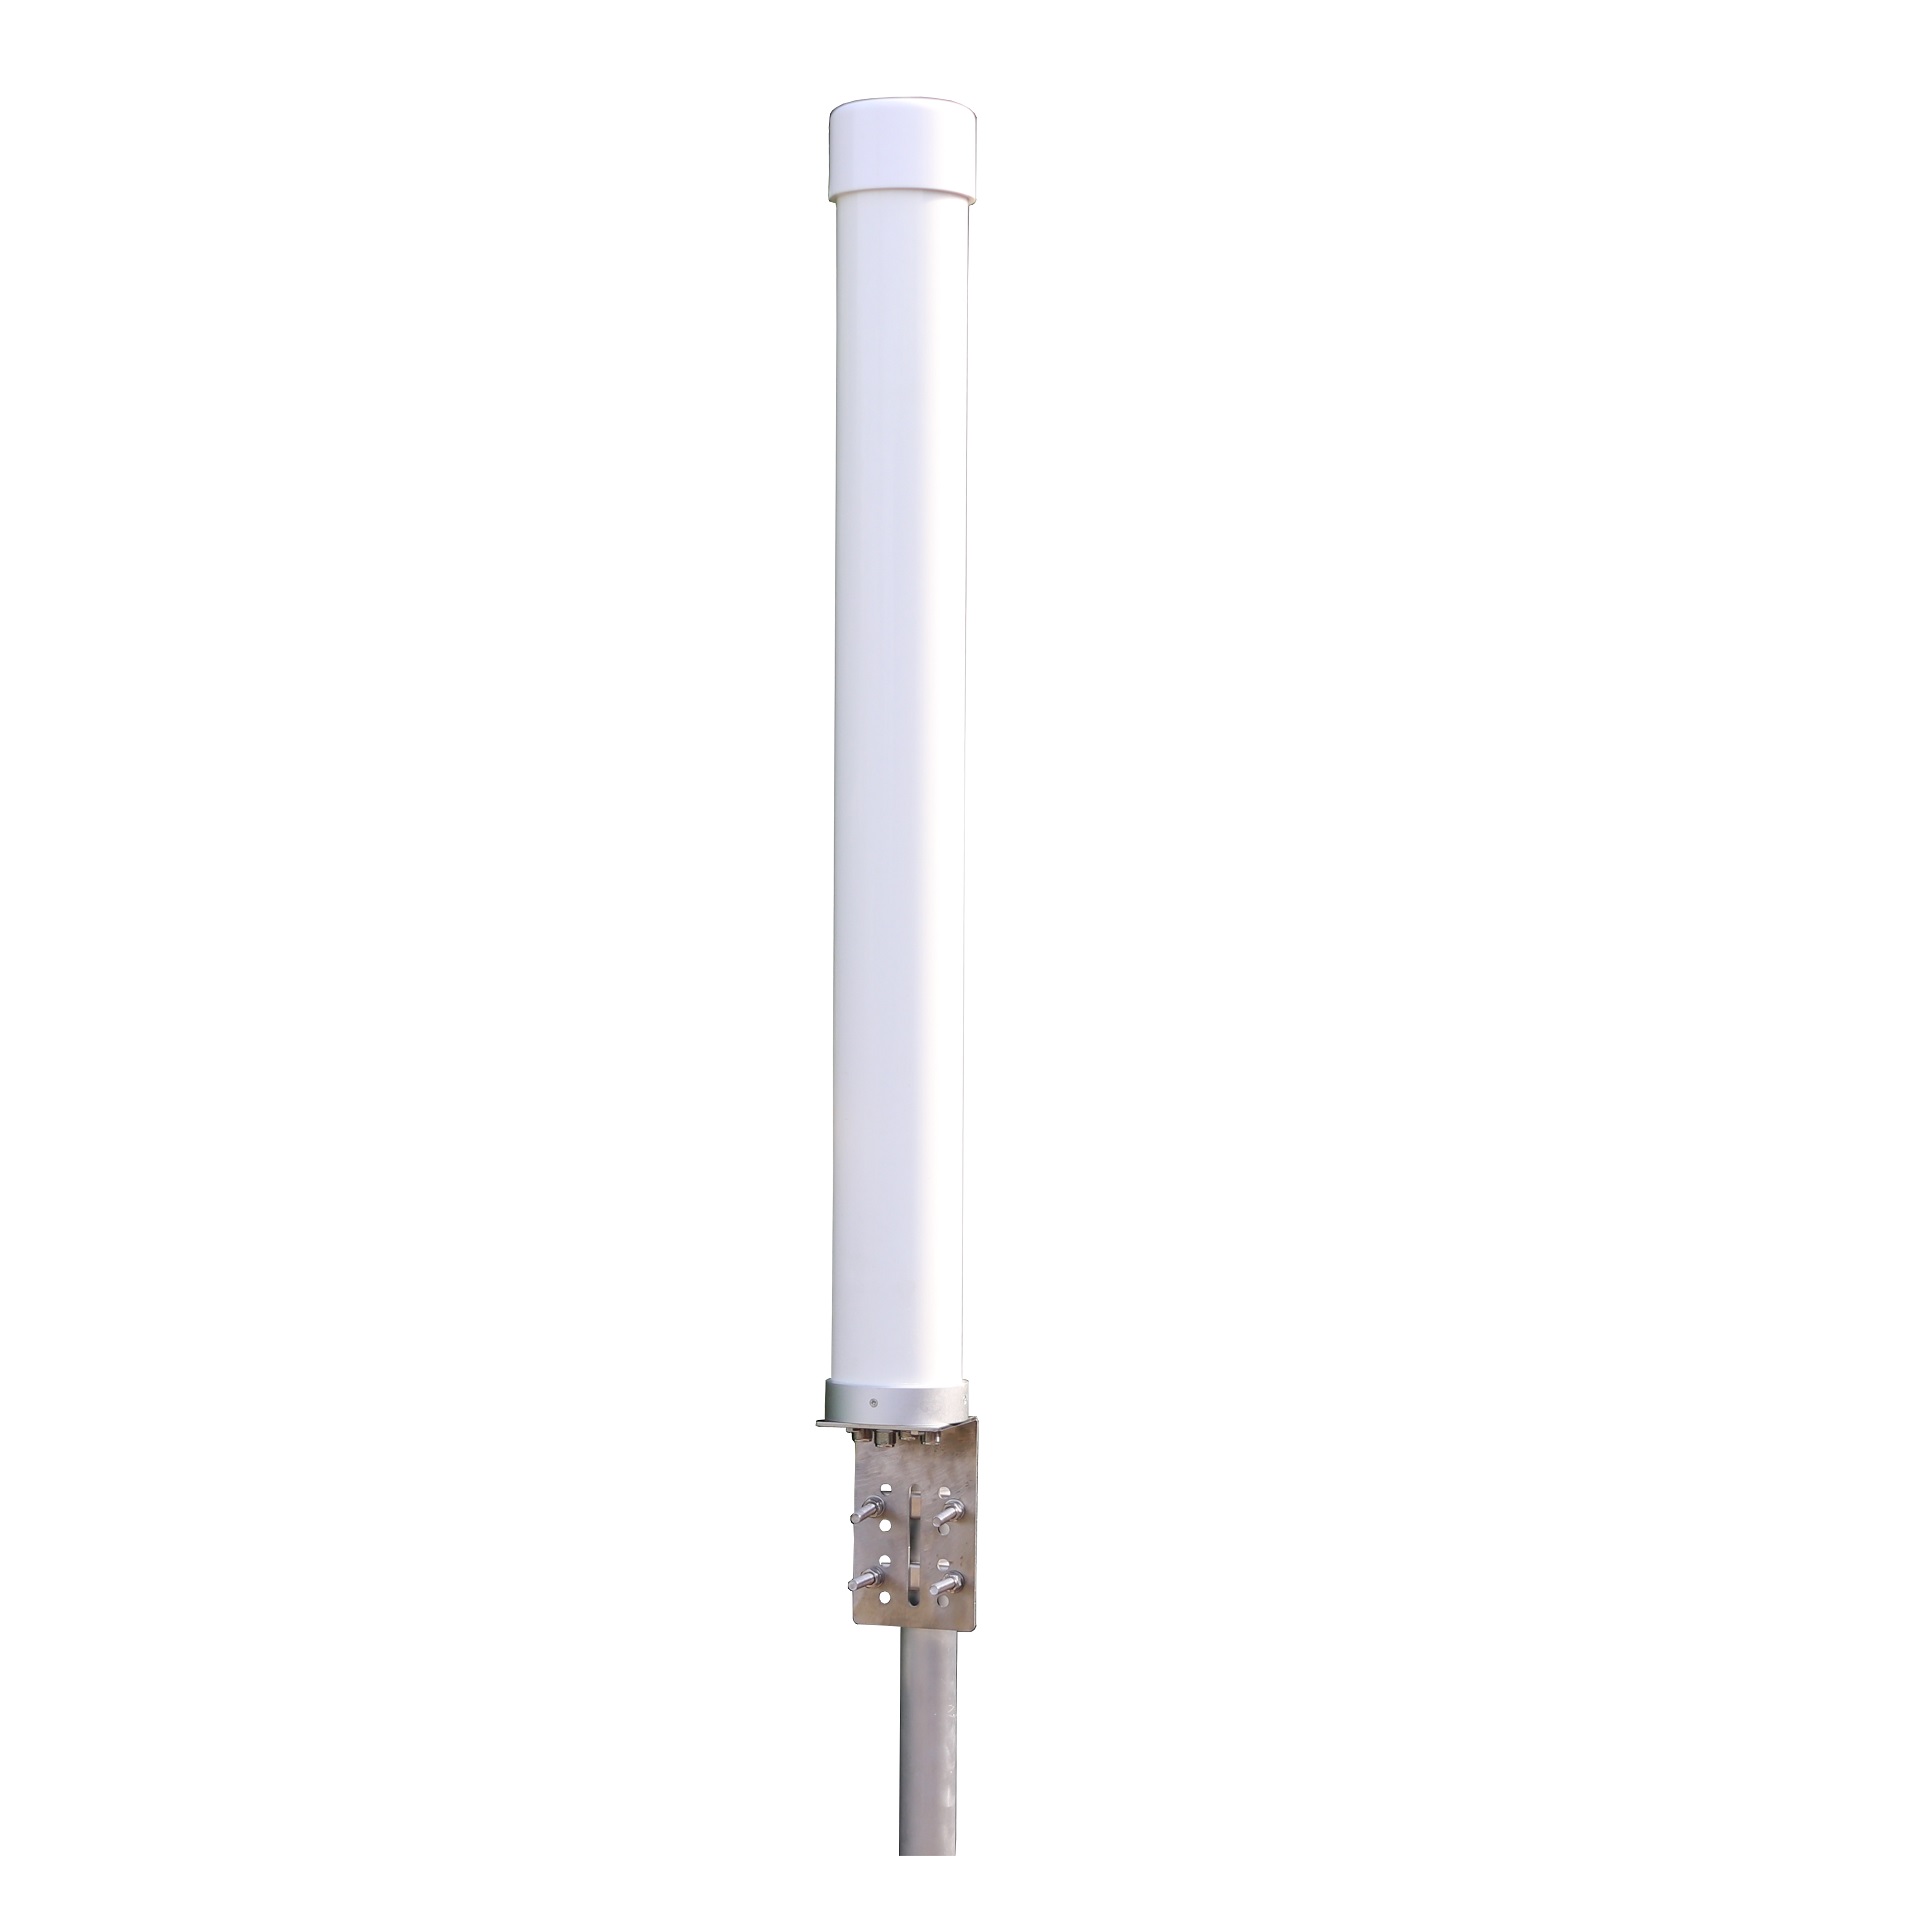 5G 4x4 MIMO Omnistrahler Antenne Loop V.4 seitlich